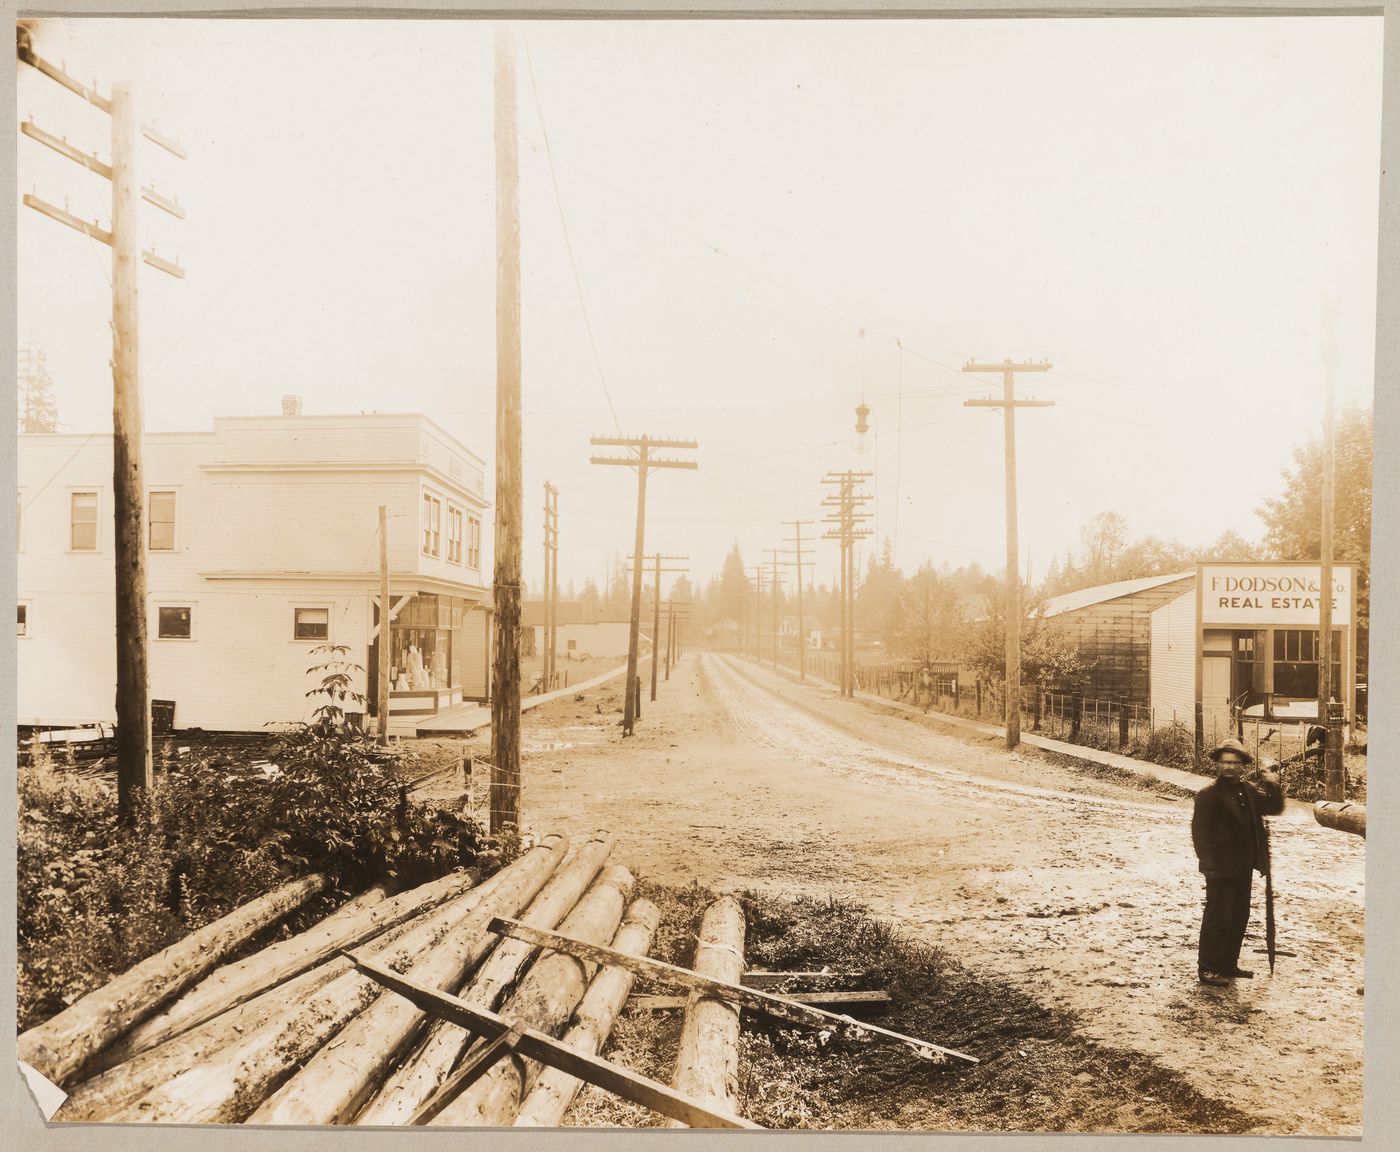 View of School Road showing a store on the left, Coquitlam (now Port Coquitlam), British Columbia